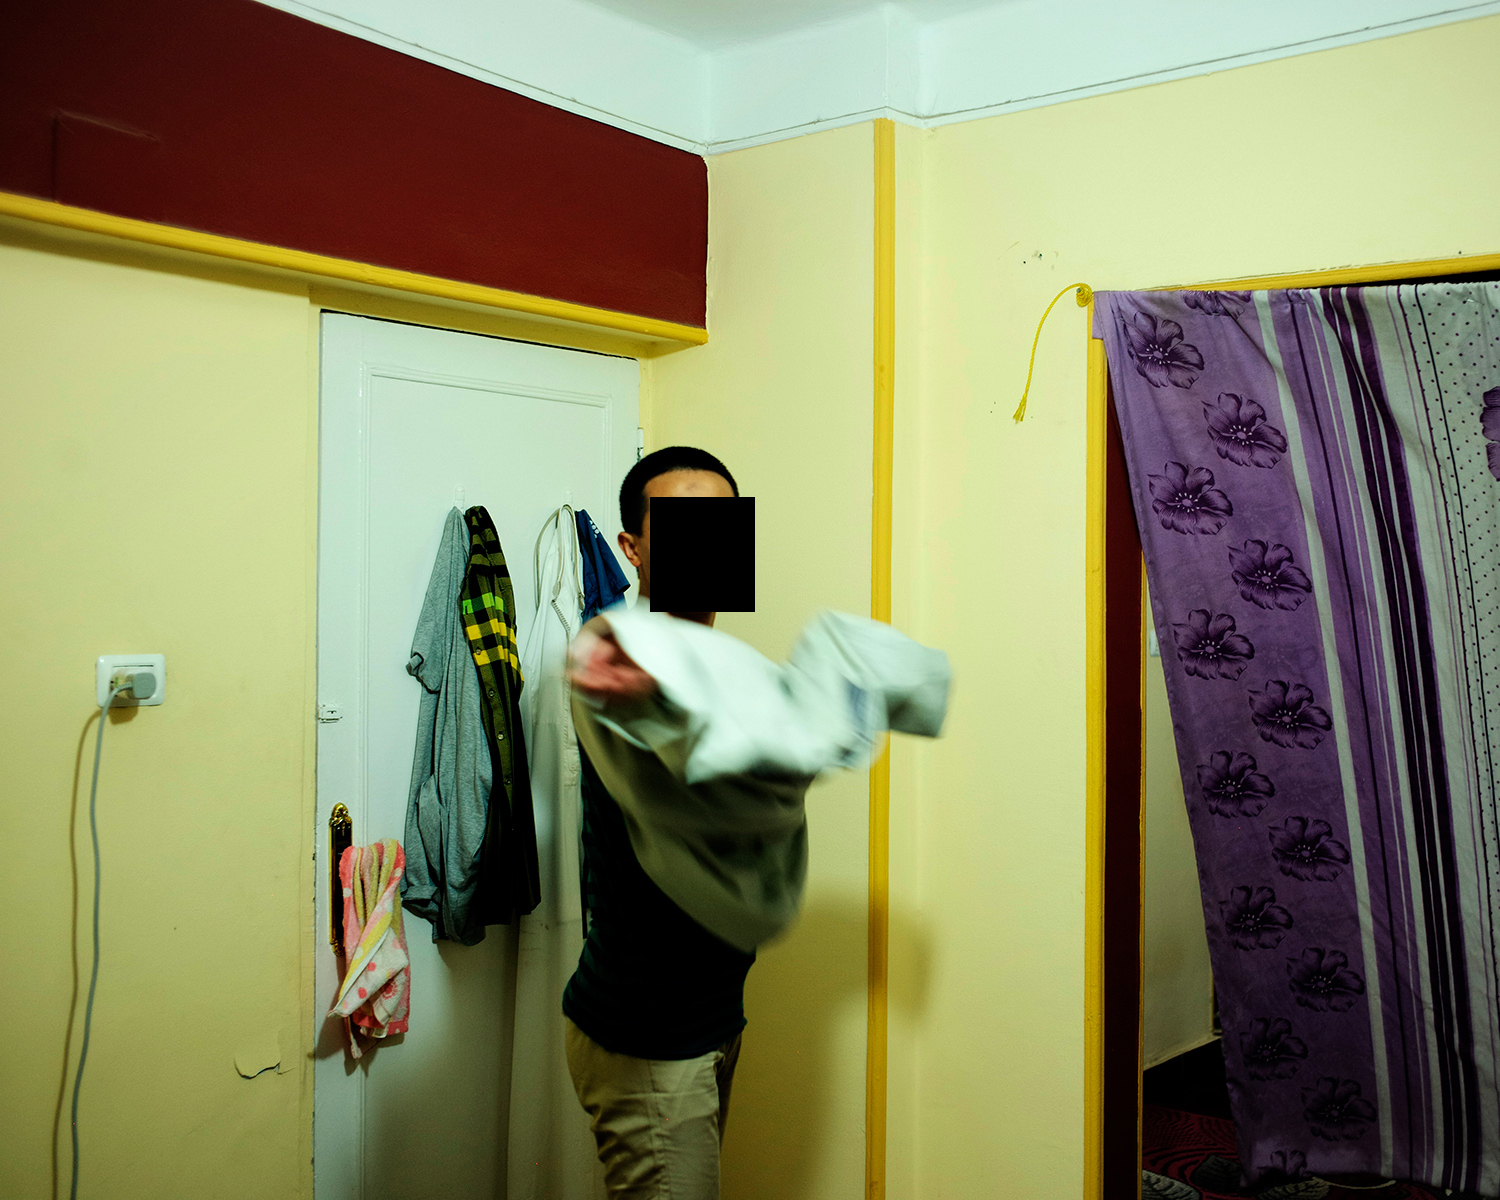 Ibrahim, who is Hui and was born in Linxia Hui Autonomous Prefecture of Gansu province, puts on a thobe before a prayer in his dormitory, in Cairo, Egypt, May 2017. Ibrahim traveled to Cairo in the beginning of 2017 and started Arabic language classes in preparation for applying to college. His goal was to attend the famed Al-Azhar University in Cairo. However, he never managed to return to Cairo after a trip back home during Ramadan in the same year.